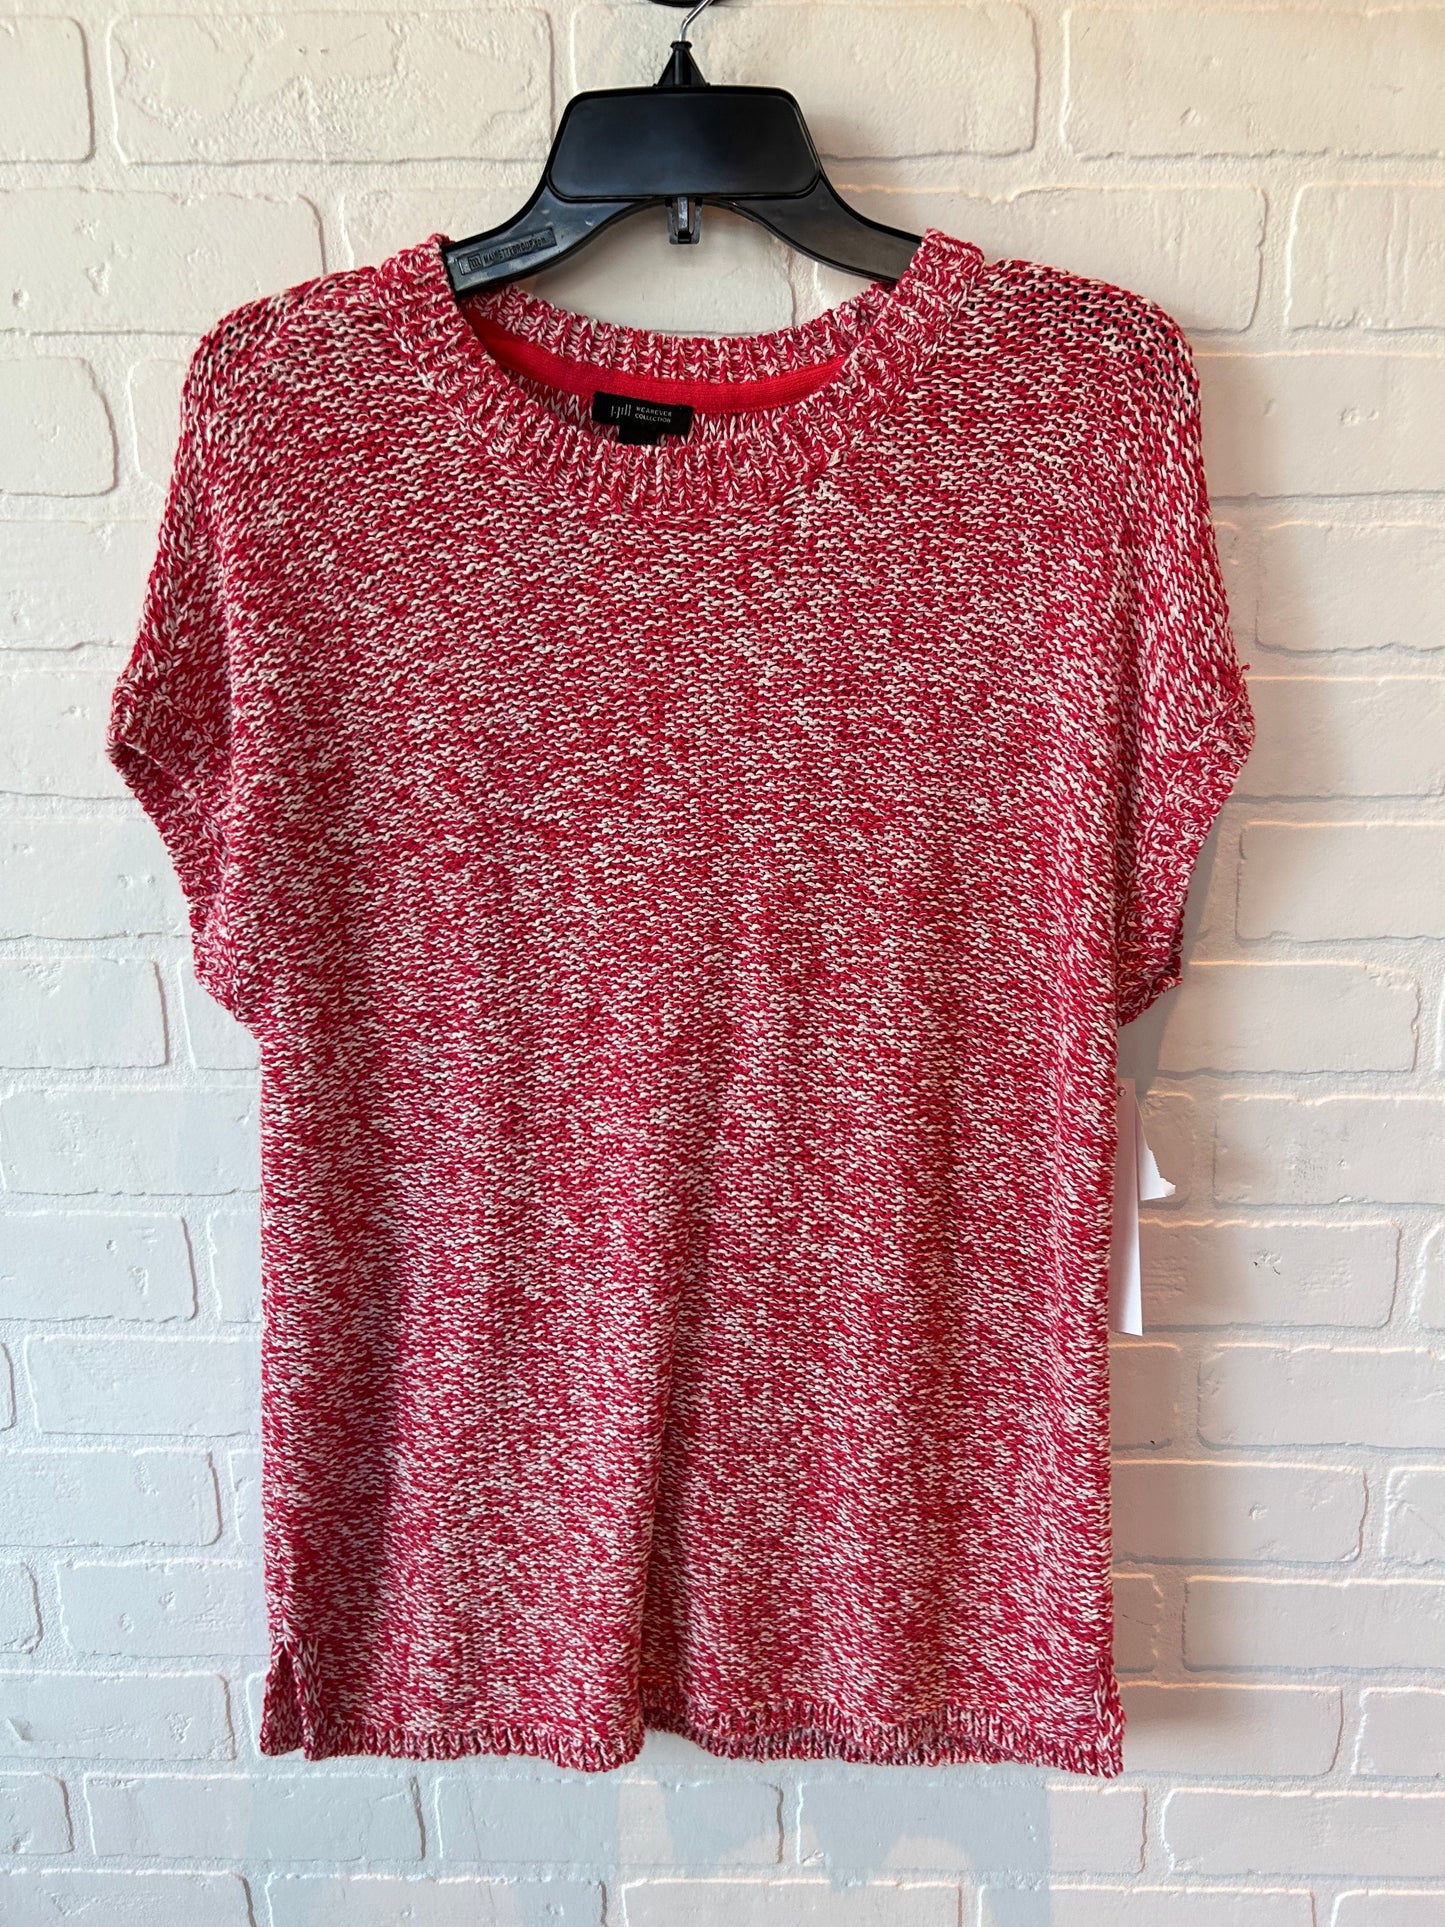 Red & White Sweater Short Sleeve J. Jill, Size S